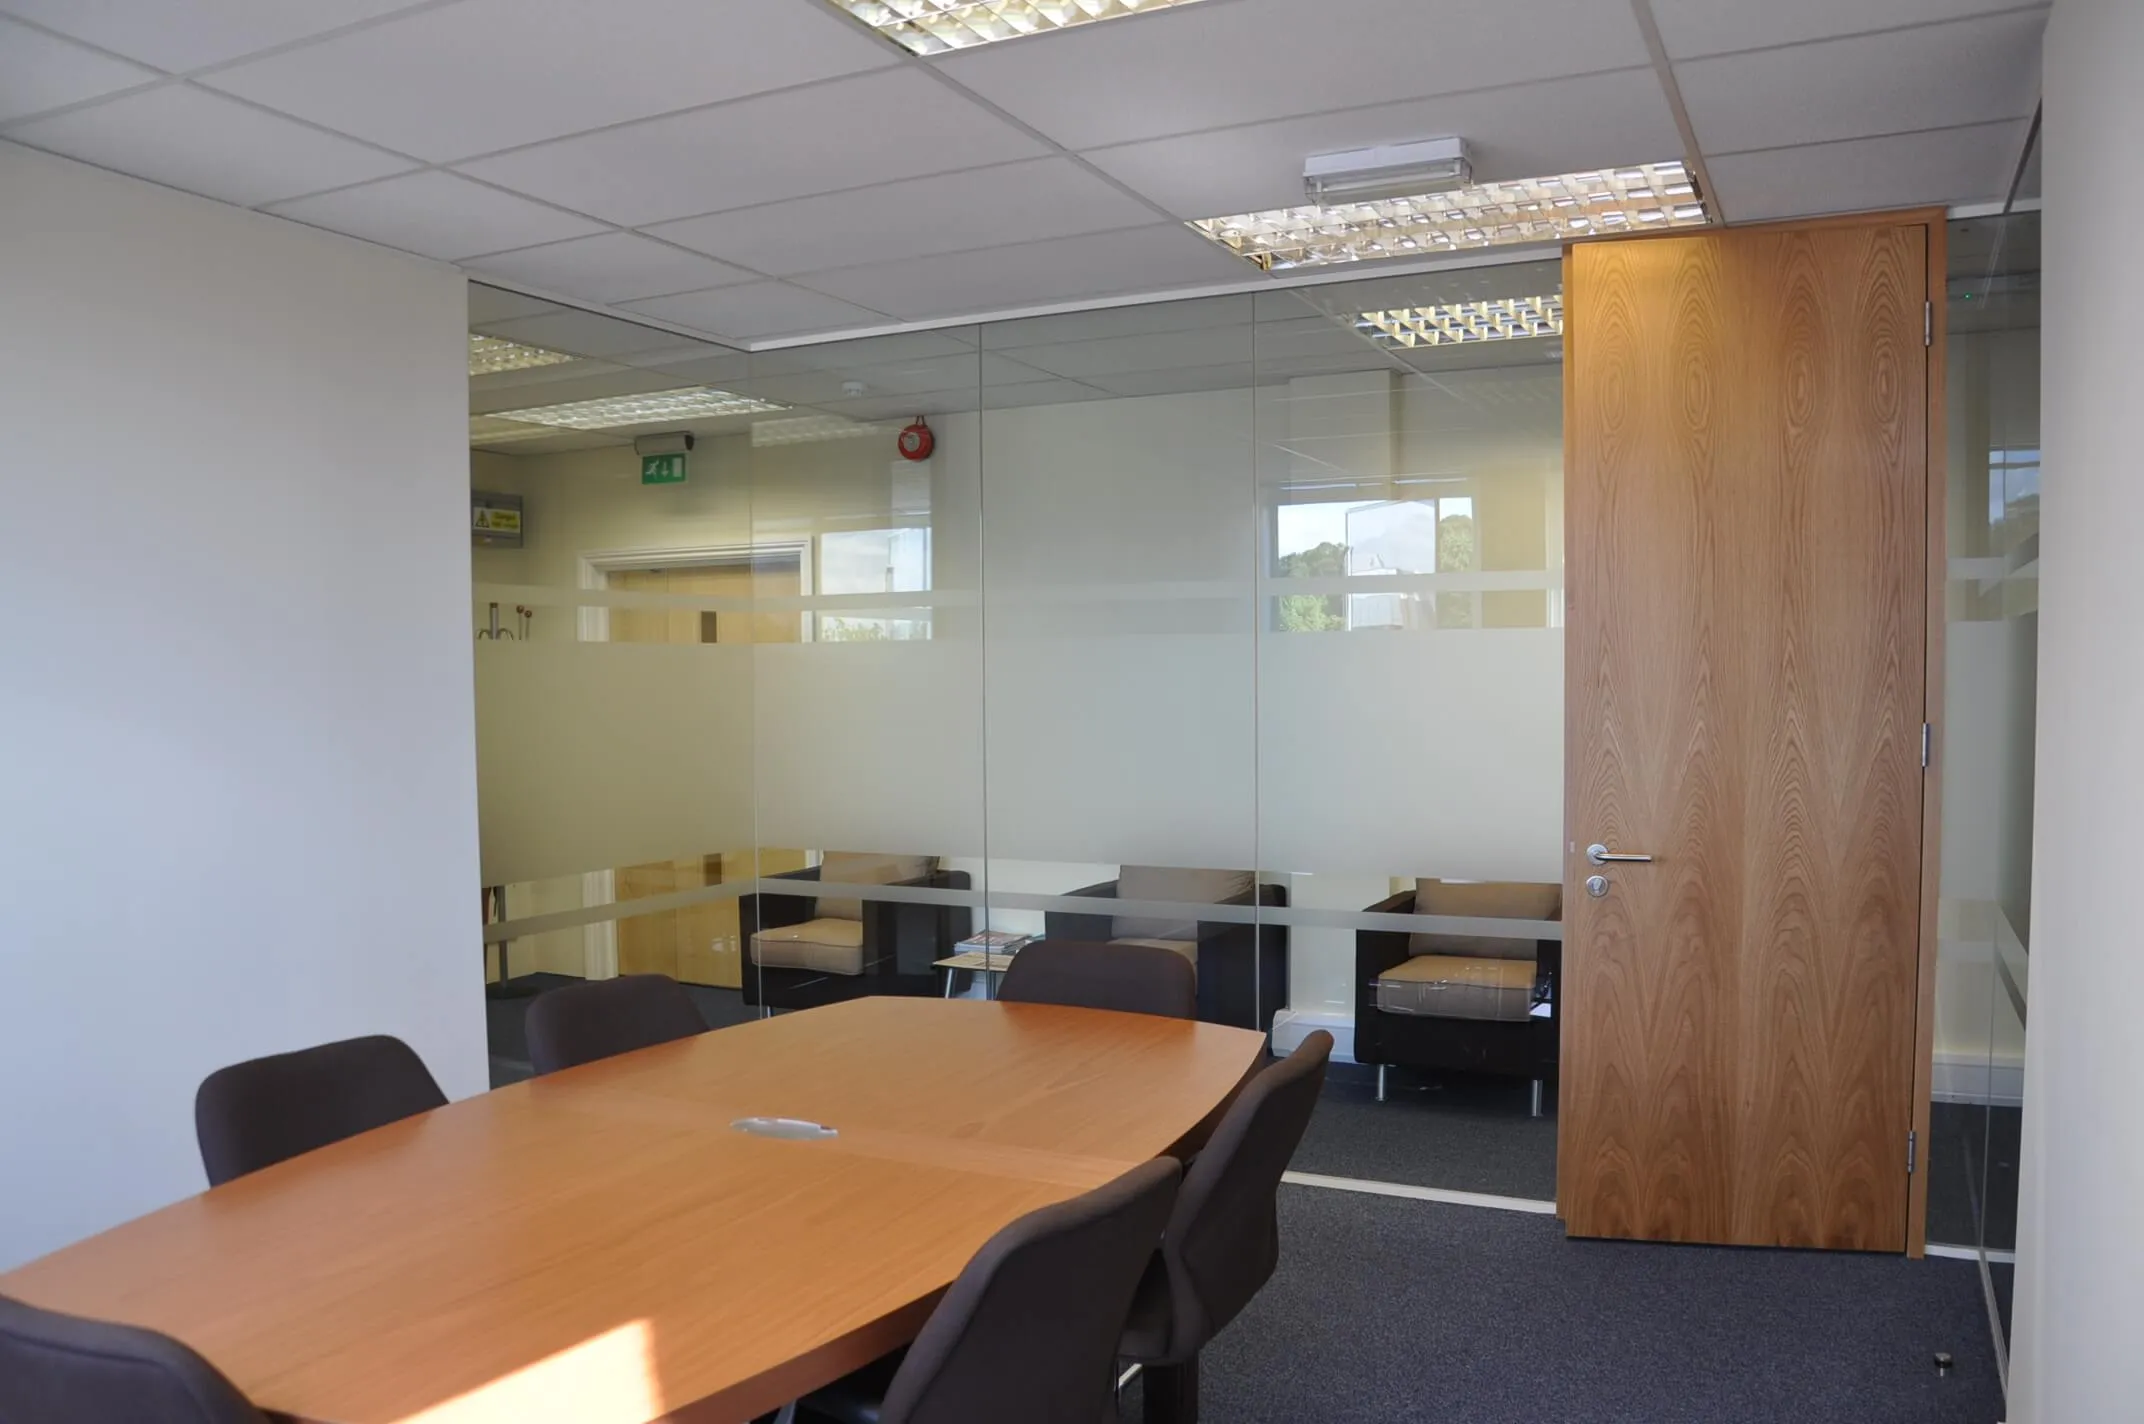 Jermyn Capital meeting room space with table chairs and glass partition with solid door